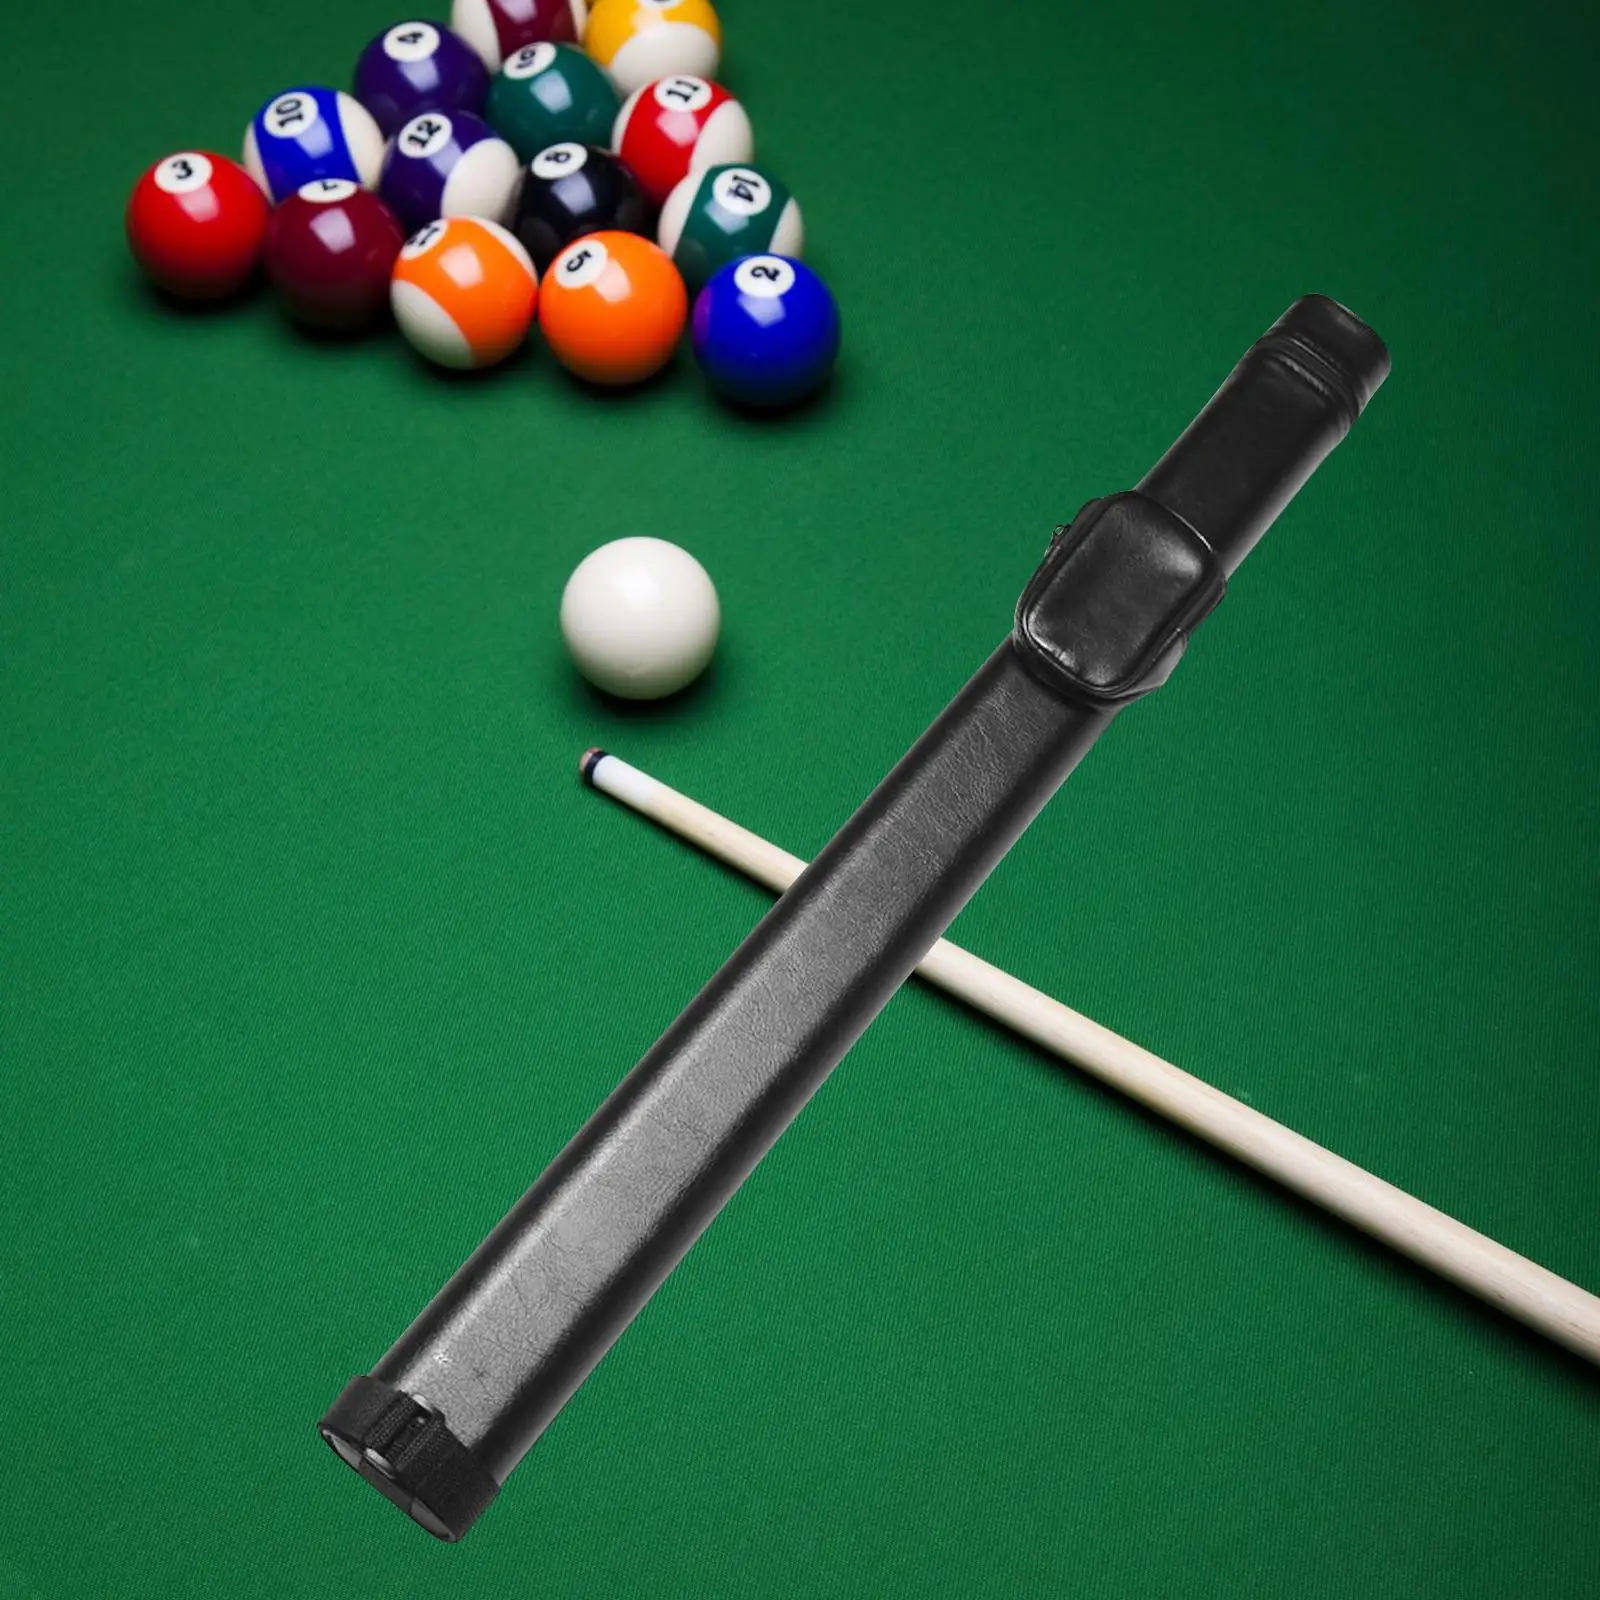 Billiards Pool Cue Case Container with Side Pocket for Split Cue with Adjustable Shoulder Strap for Snooker Club Travel Outdoor